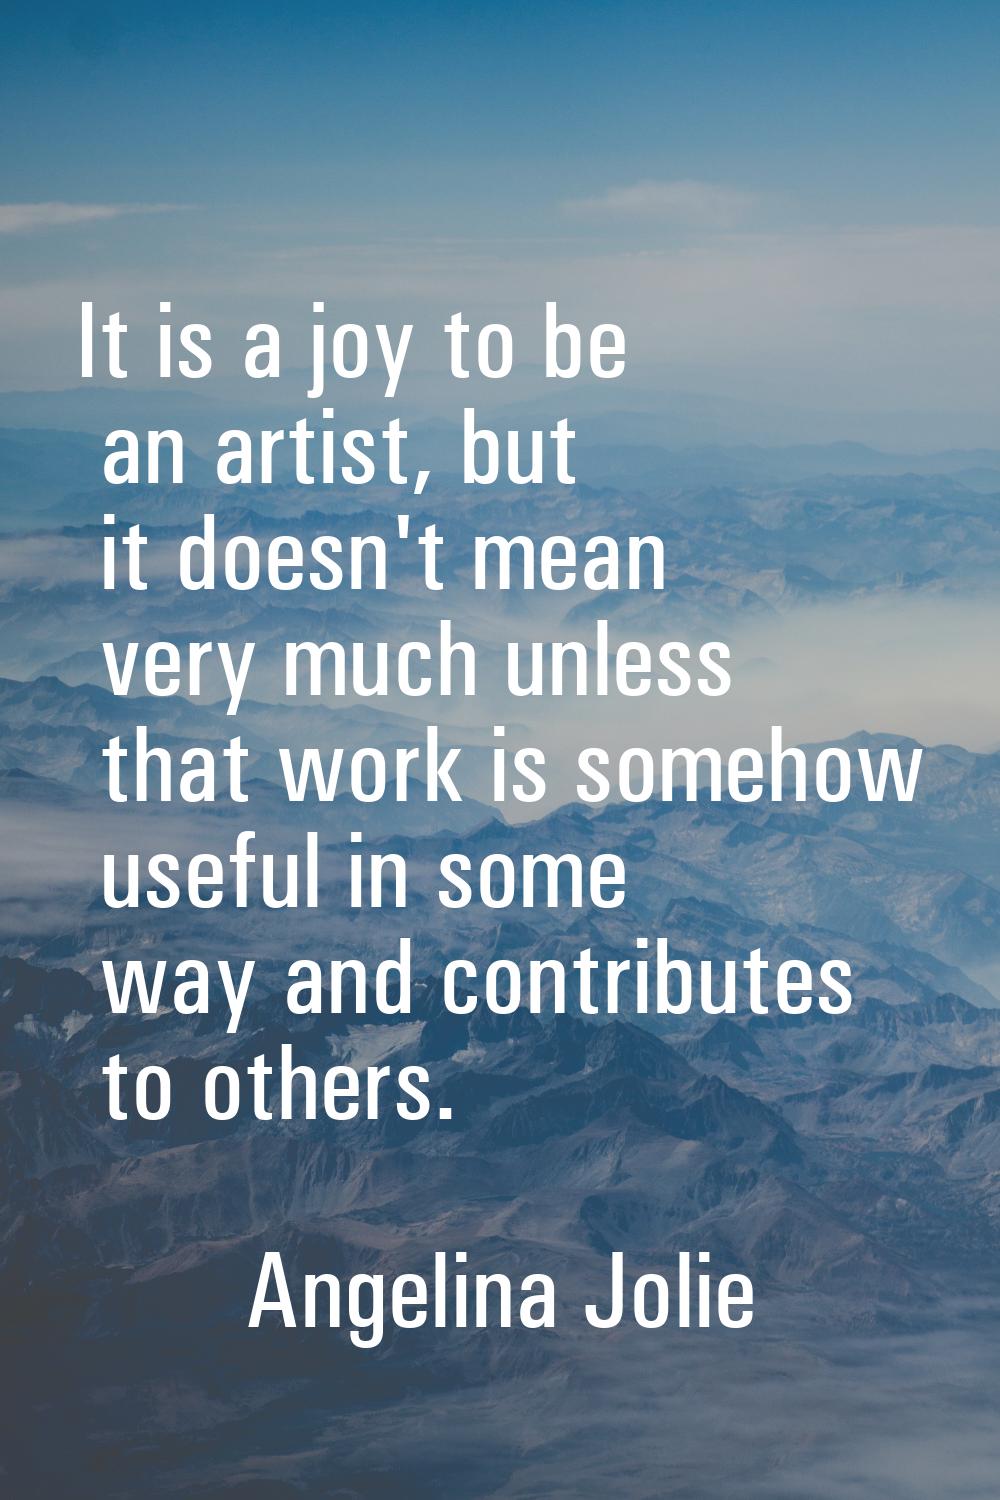 It is a joy to be an artist, but it doesn't mean very much unless that work is somehow useful in so